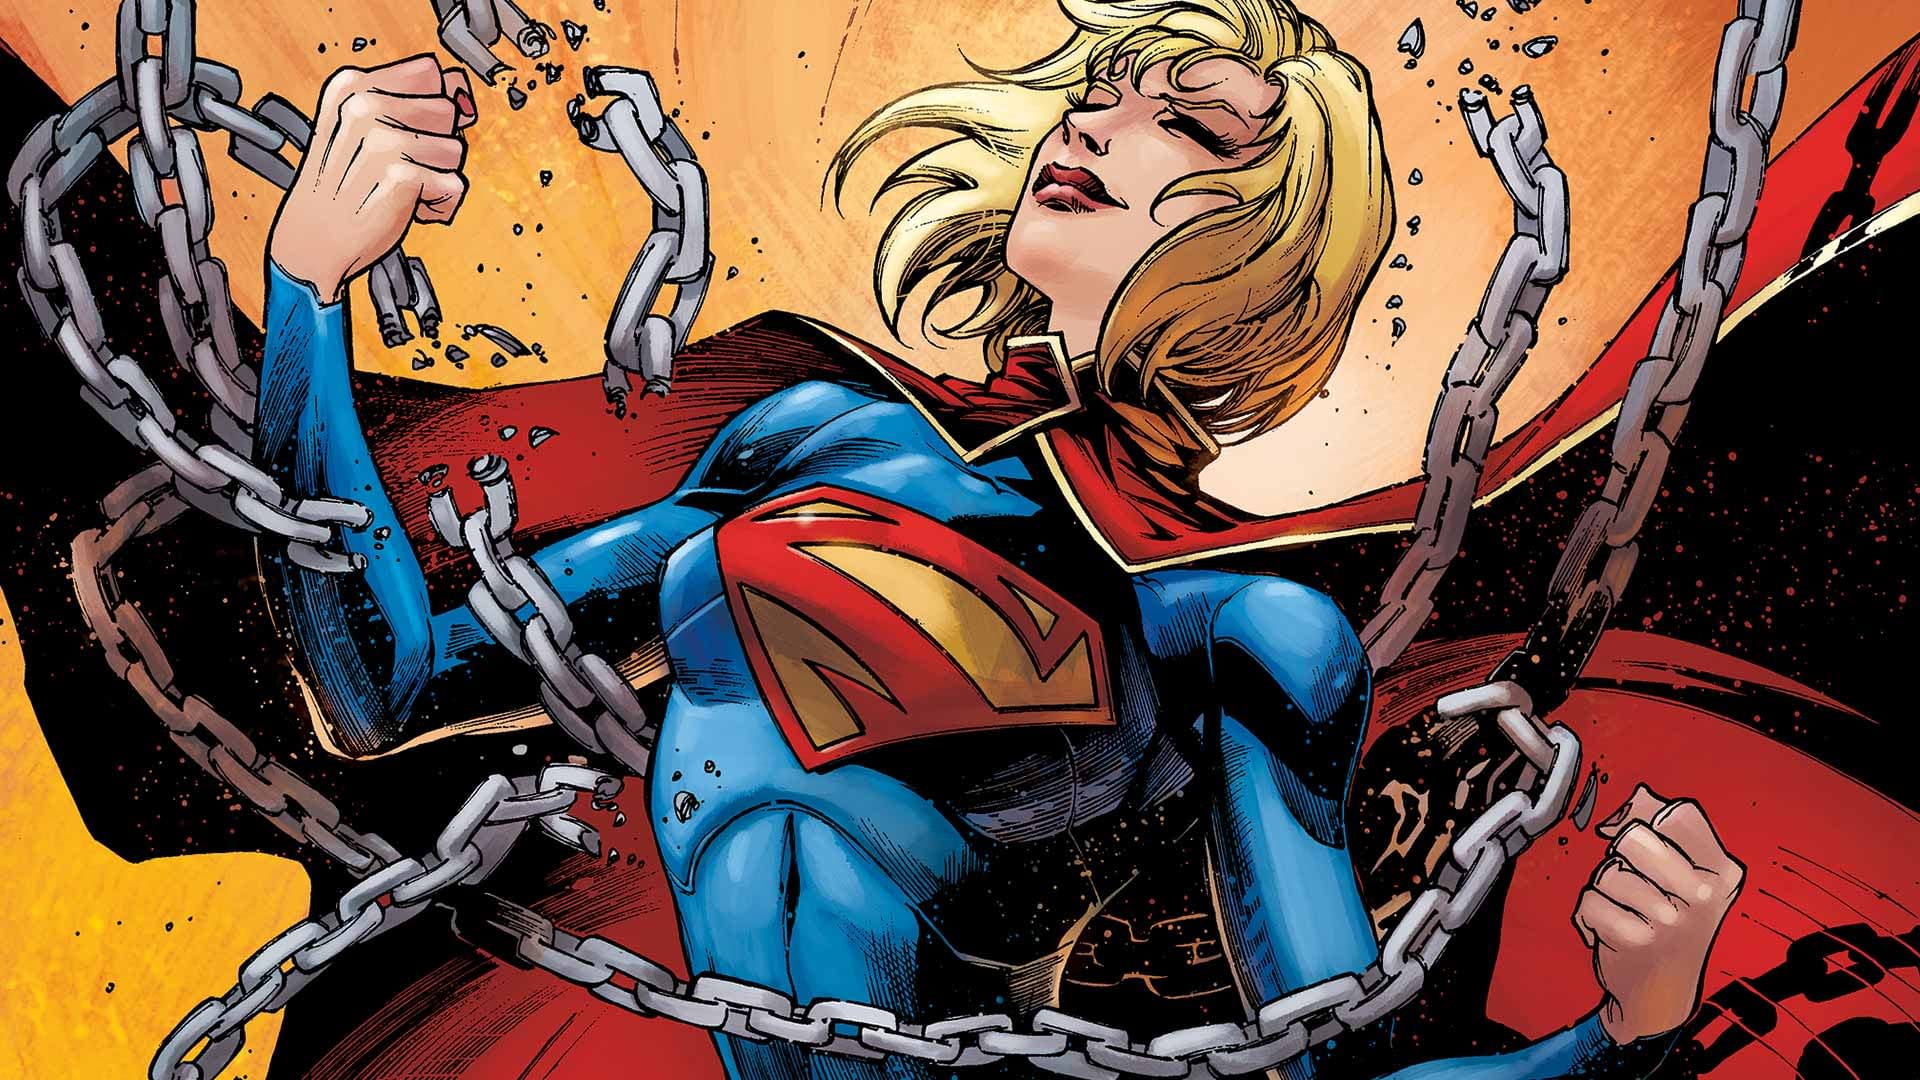 Warner Bros. Looking for a Female Director for Supergirl Movie